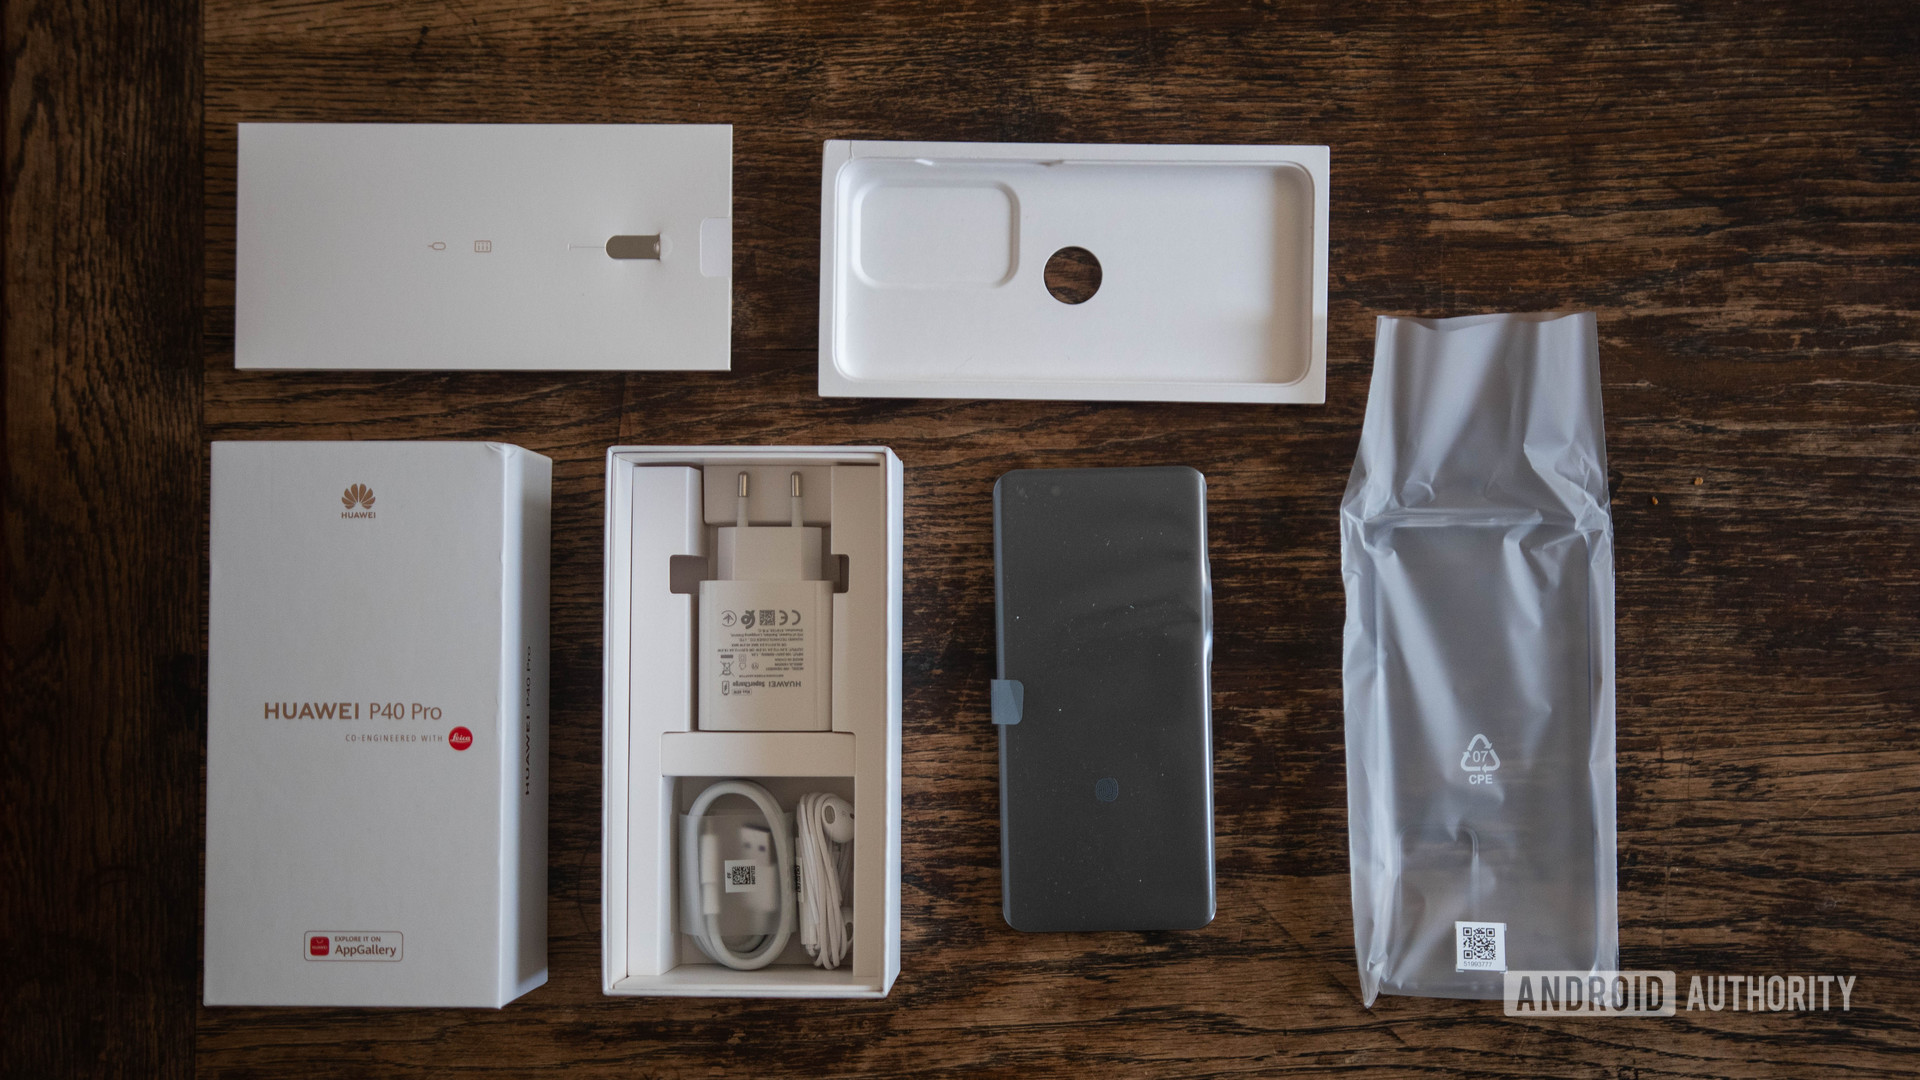 HUAWEI P40 Pro Whats in the box